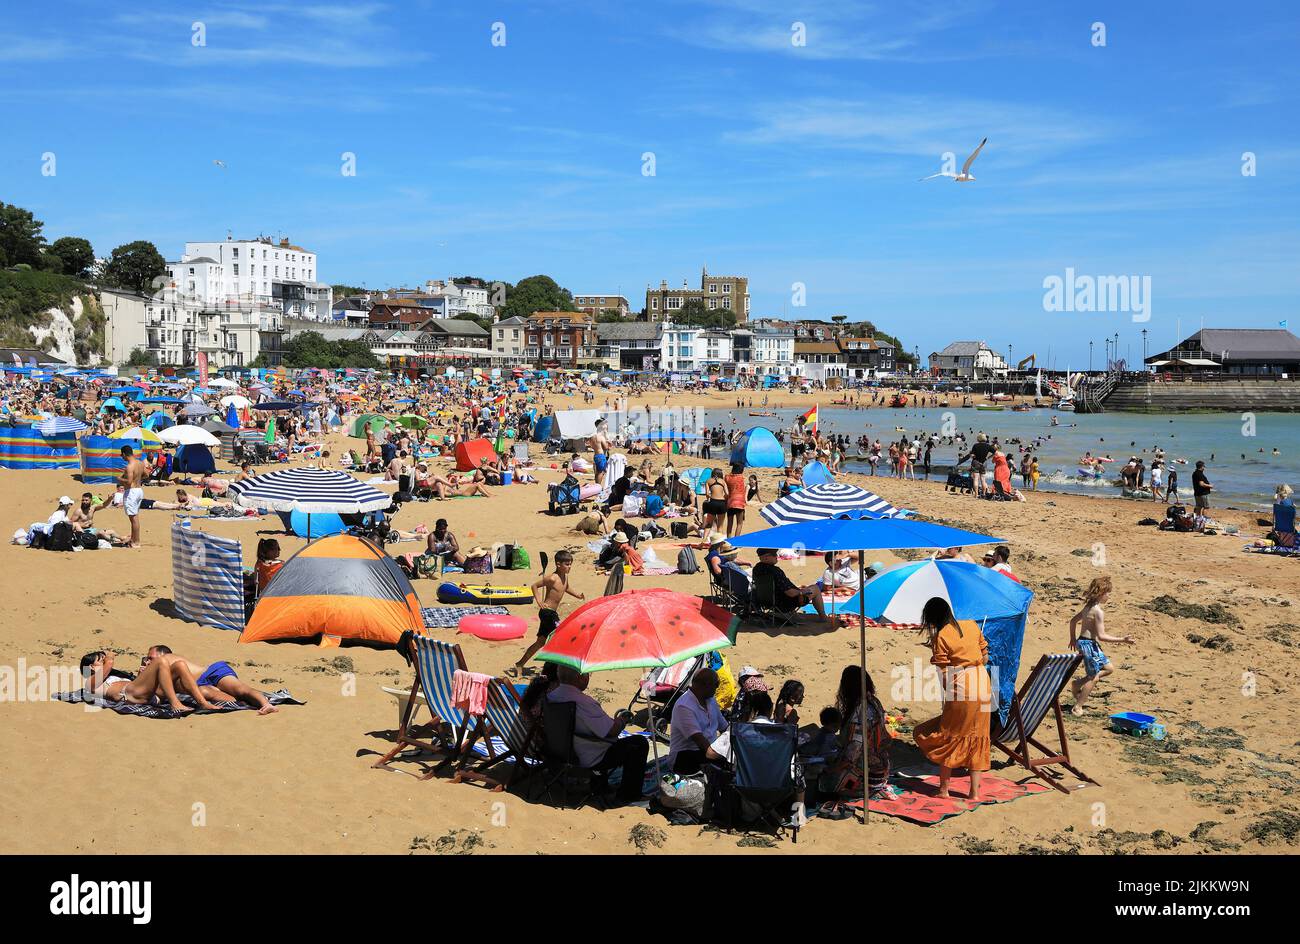 Lovely Viking Bay beach at Broadstairs on the Isle of Thanet, in Kent, UK Stock Photo